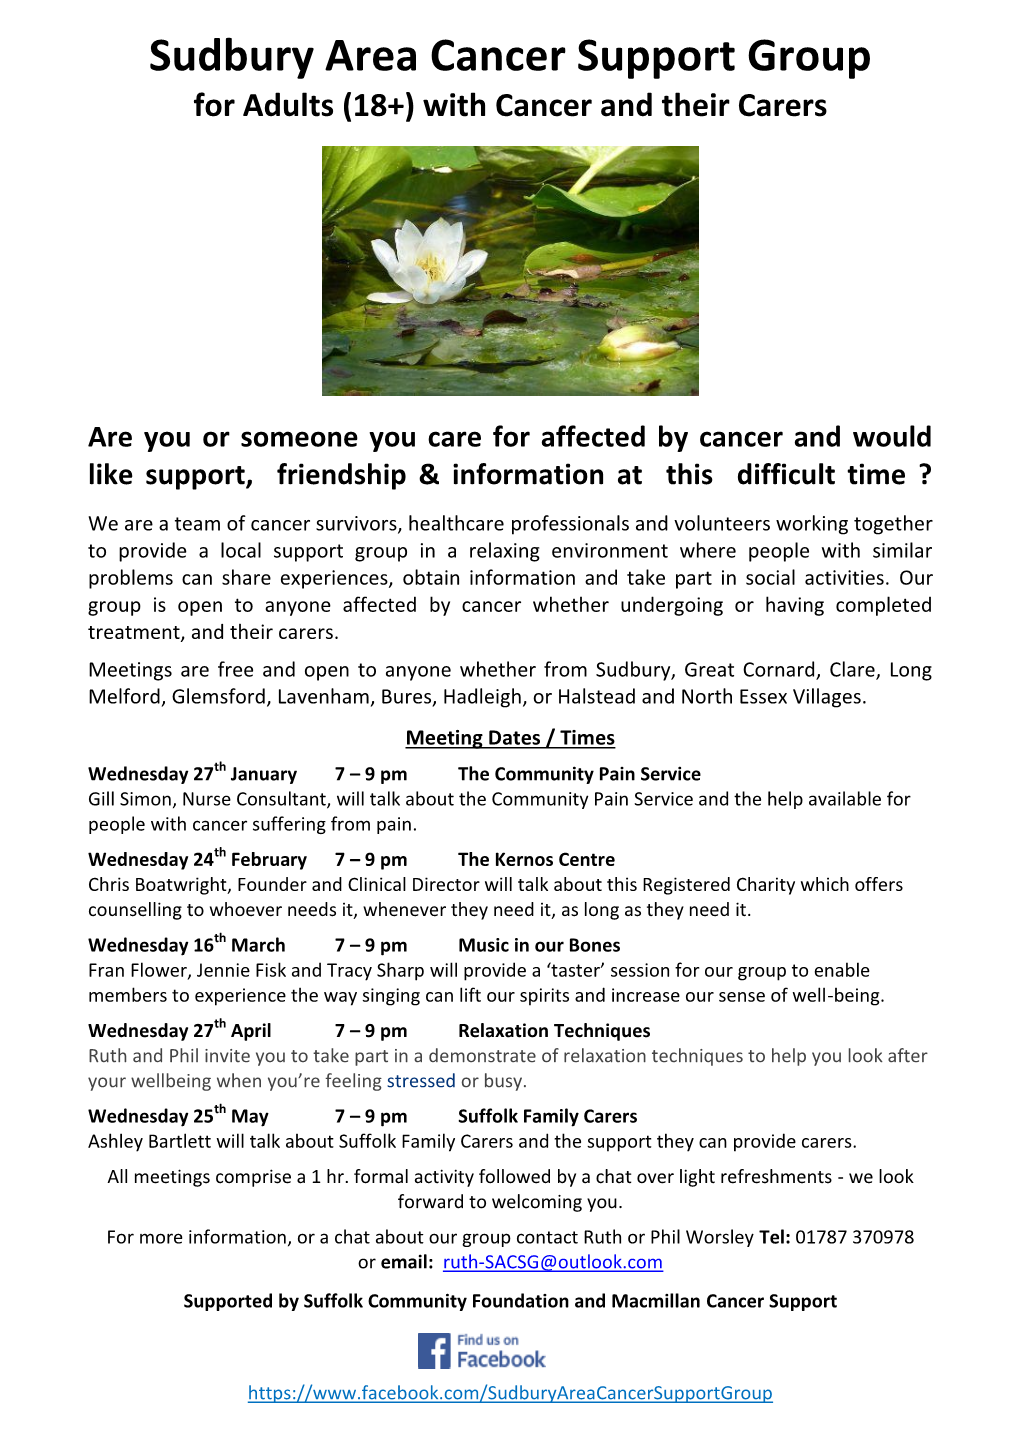 Sudbury Area Cancer Support Group for Adults (18+) with Cancer and Their Carers